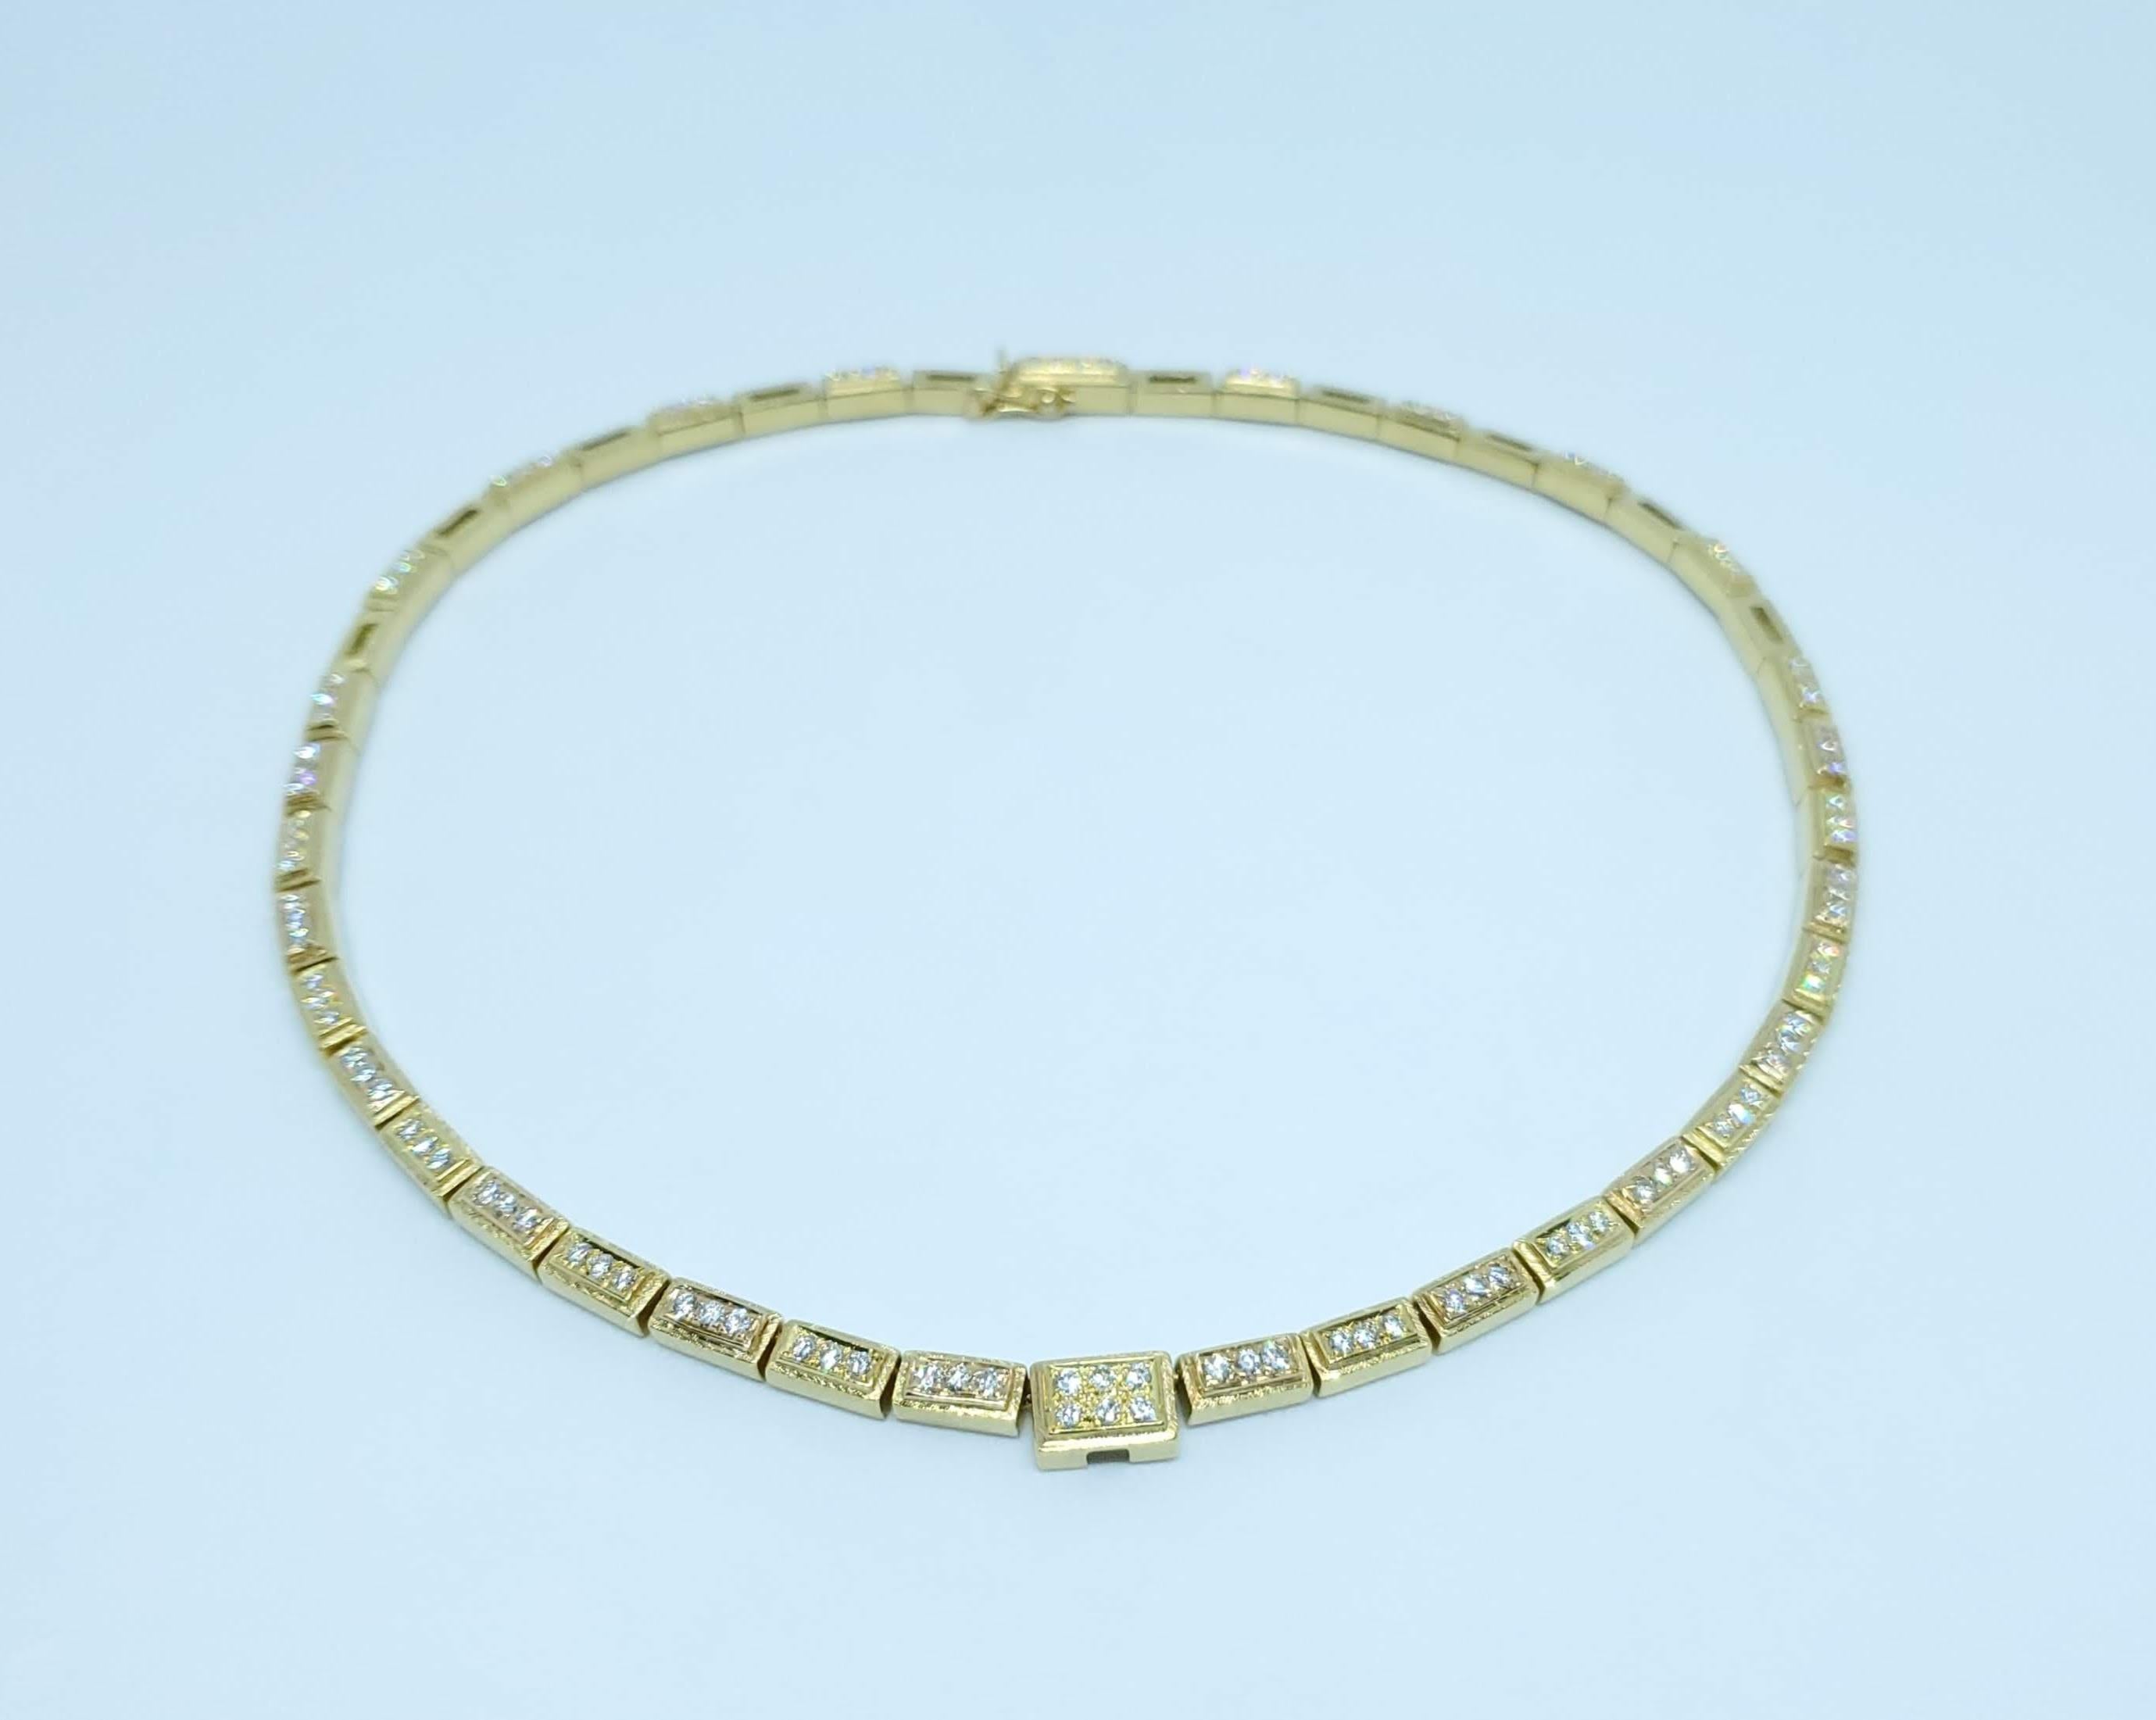 Thanks for taking a look at this beautiful Haroldo Burle Marx 18 Karat Gold Diamond Neck Collar. It weighs 51 grams, is 16 inches long, and .17 inches in width. It has 70 very fine diamonds totalling 1.43 cts. We originally sold this piece in 1985,